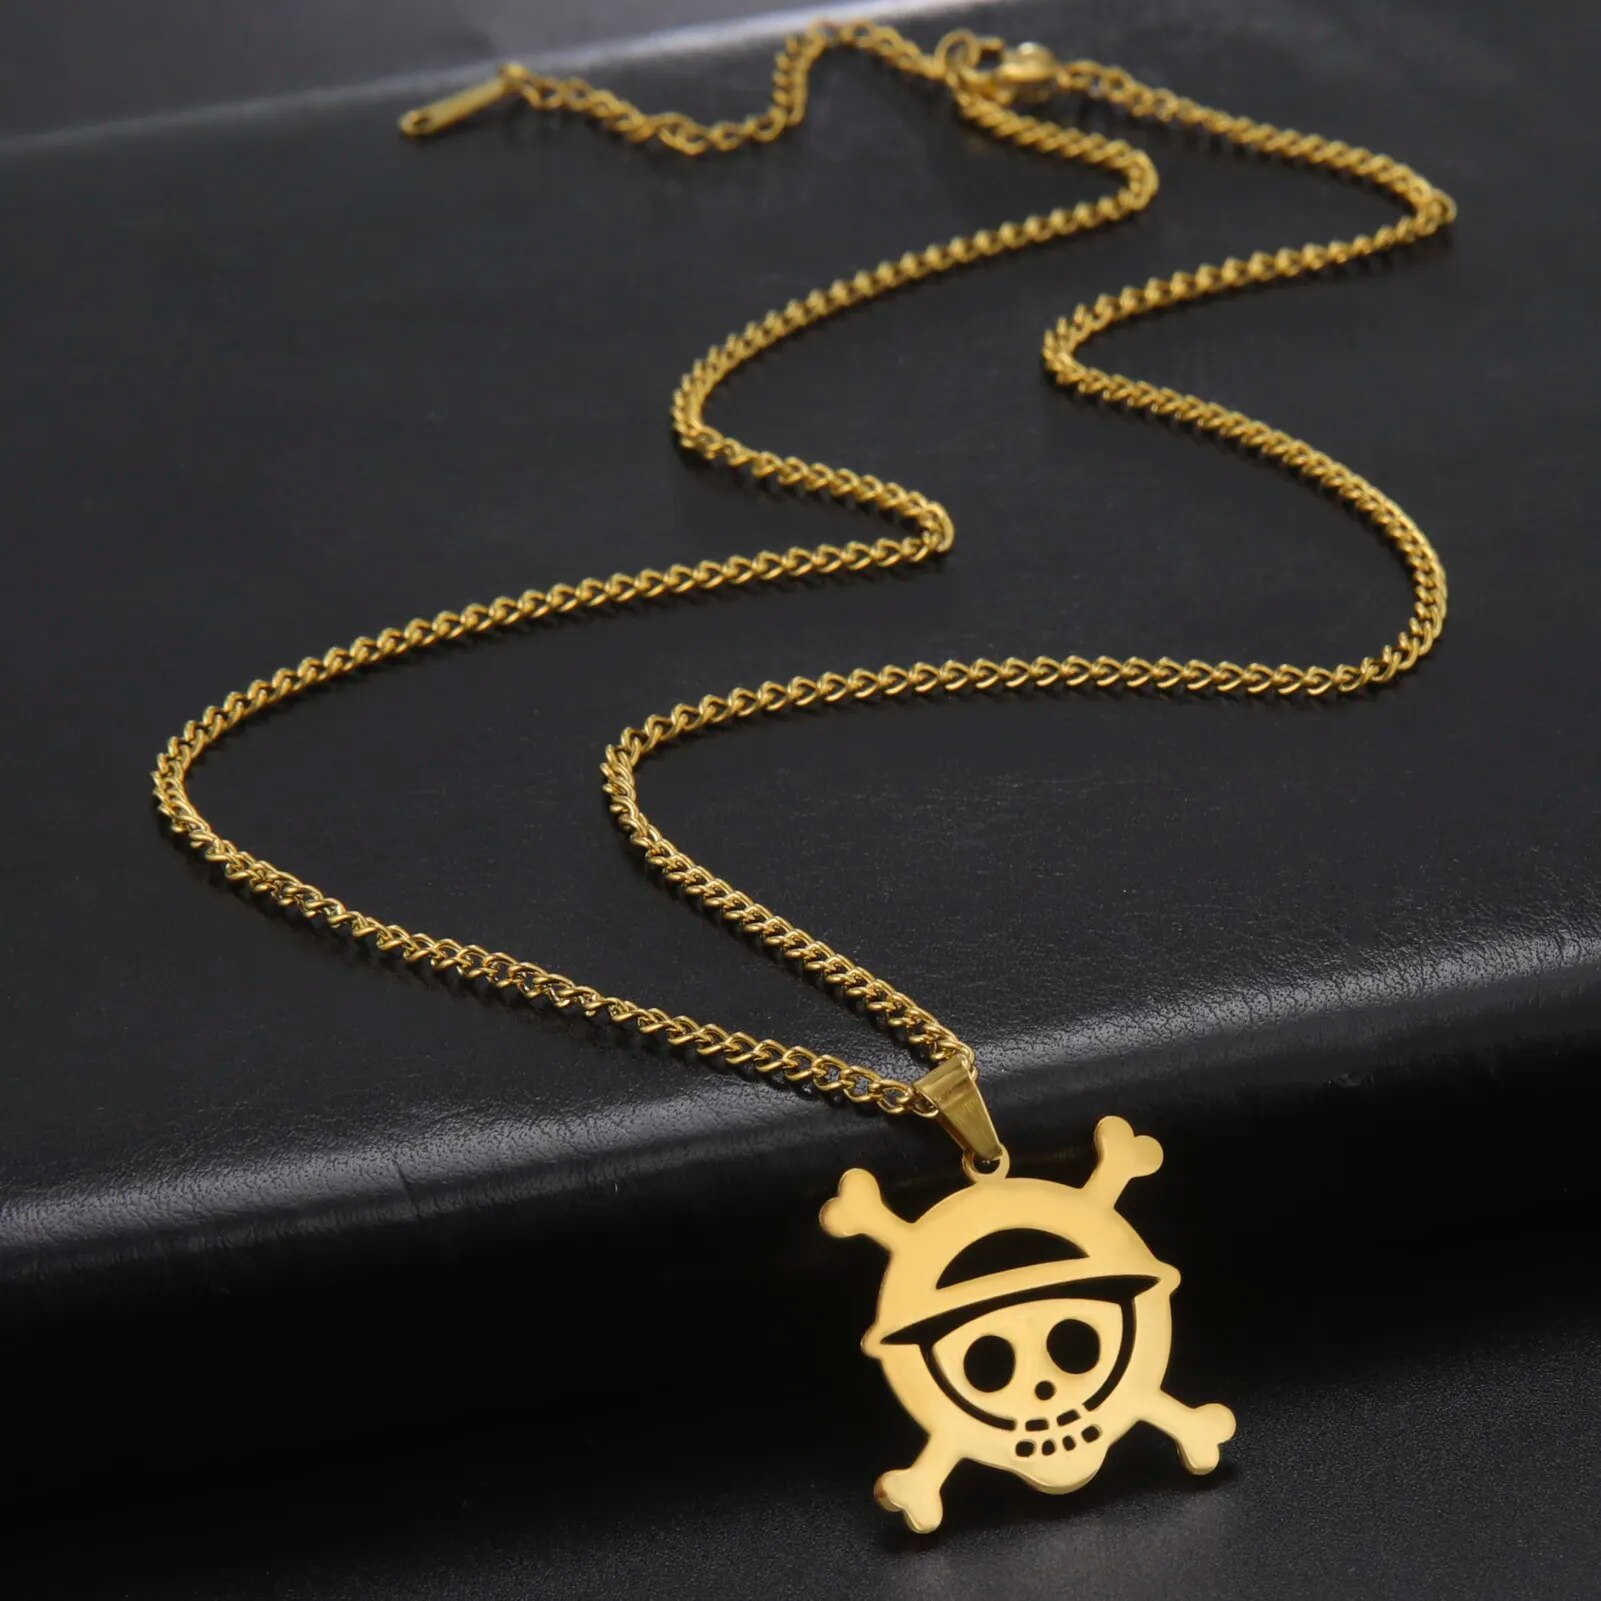 One Piece Necklace – Luffy Jolly Roger Stainless Steel Luffy 31